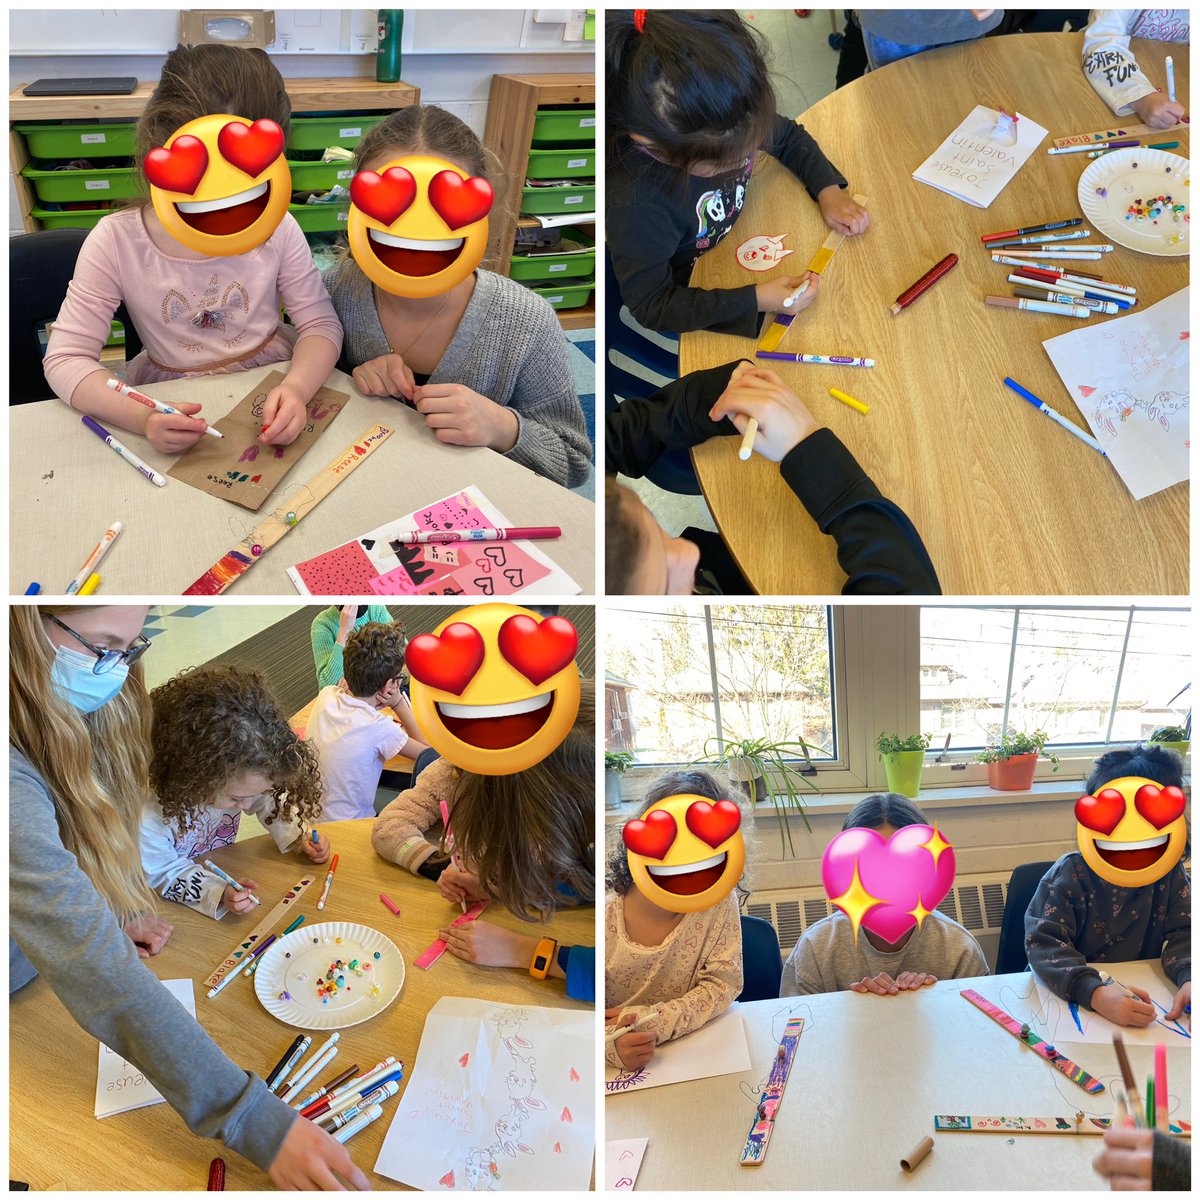 Valentine’s Day crafts with our copains de lecture was so fun! Ss made and decorated wire heart sculptures together ❤️ Joyeuse Saint-Valentin! @AllenbyPS_TDSB @TDSB_French